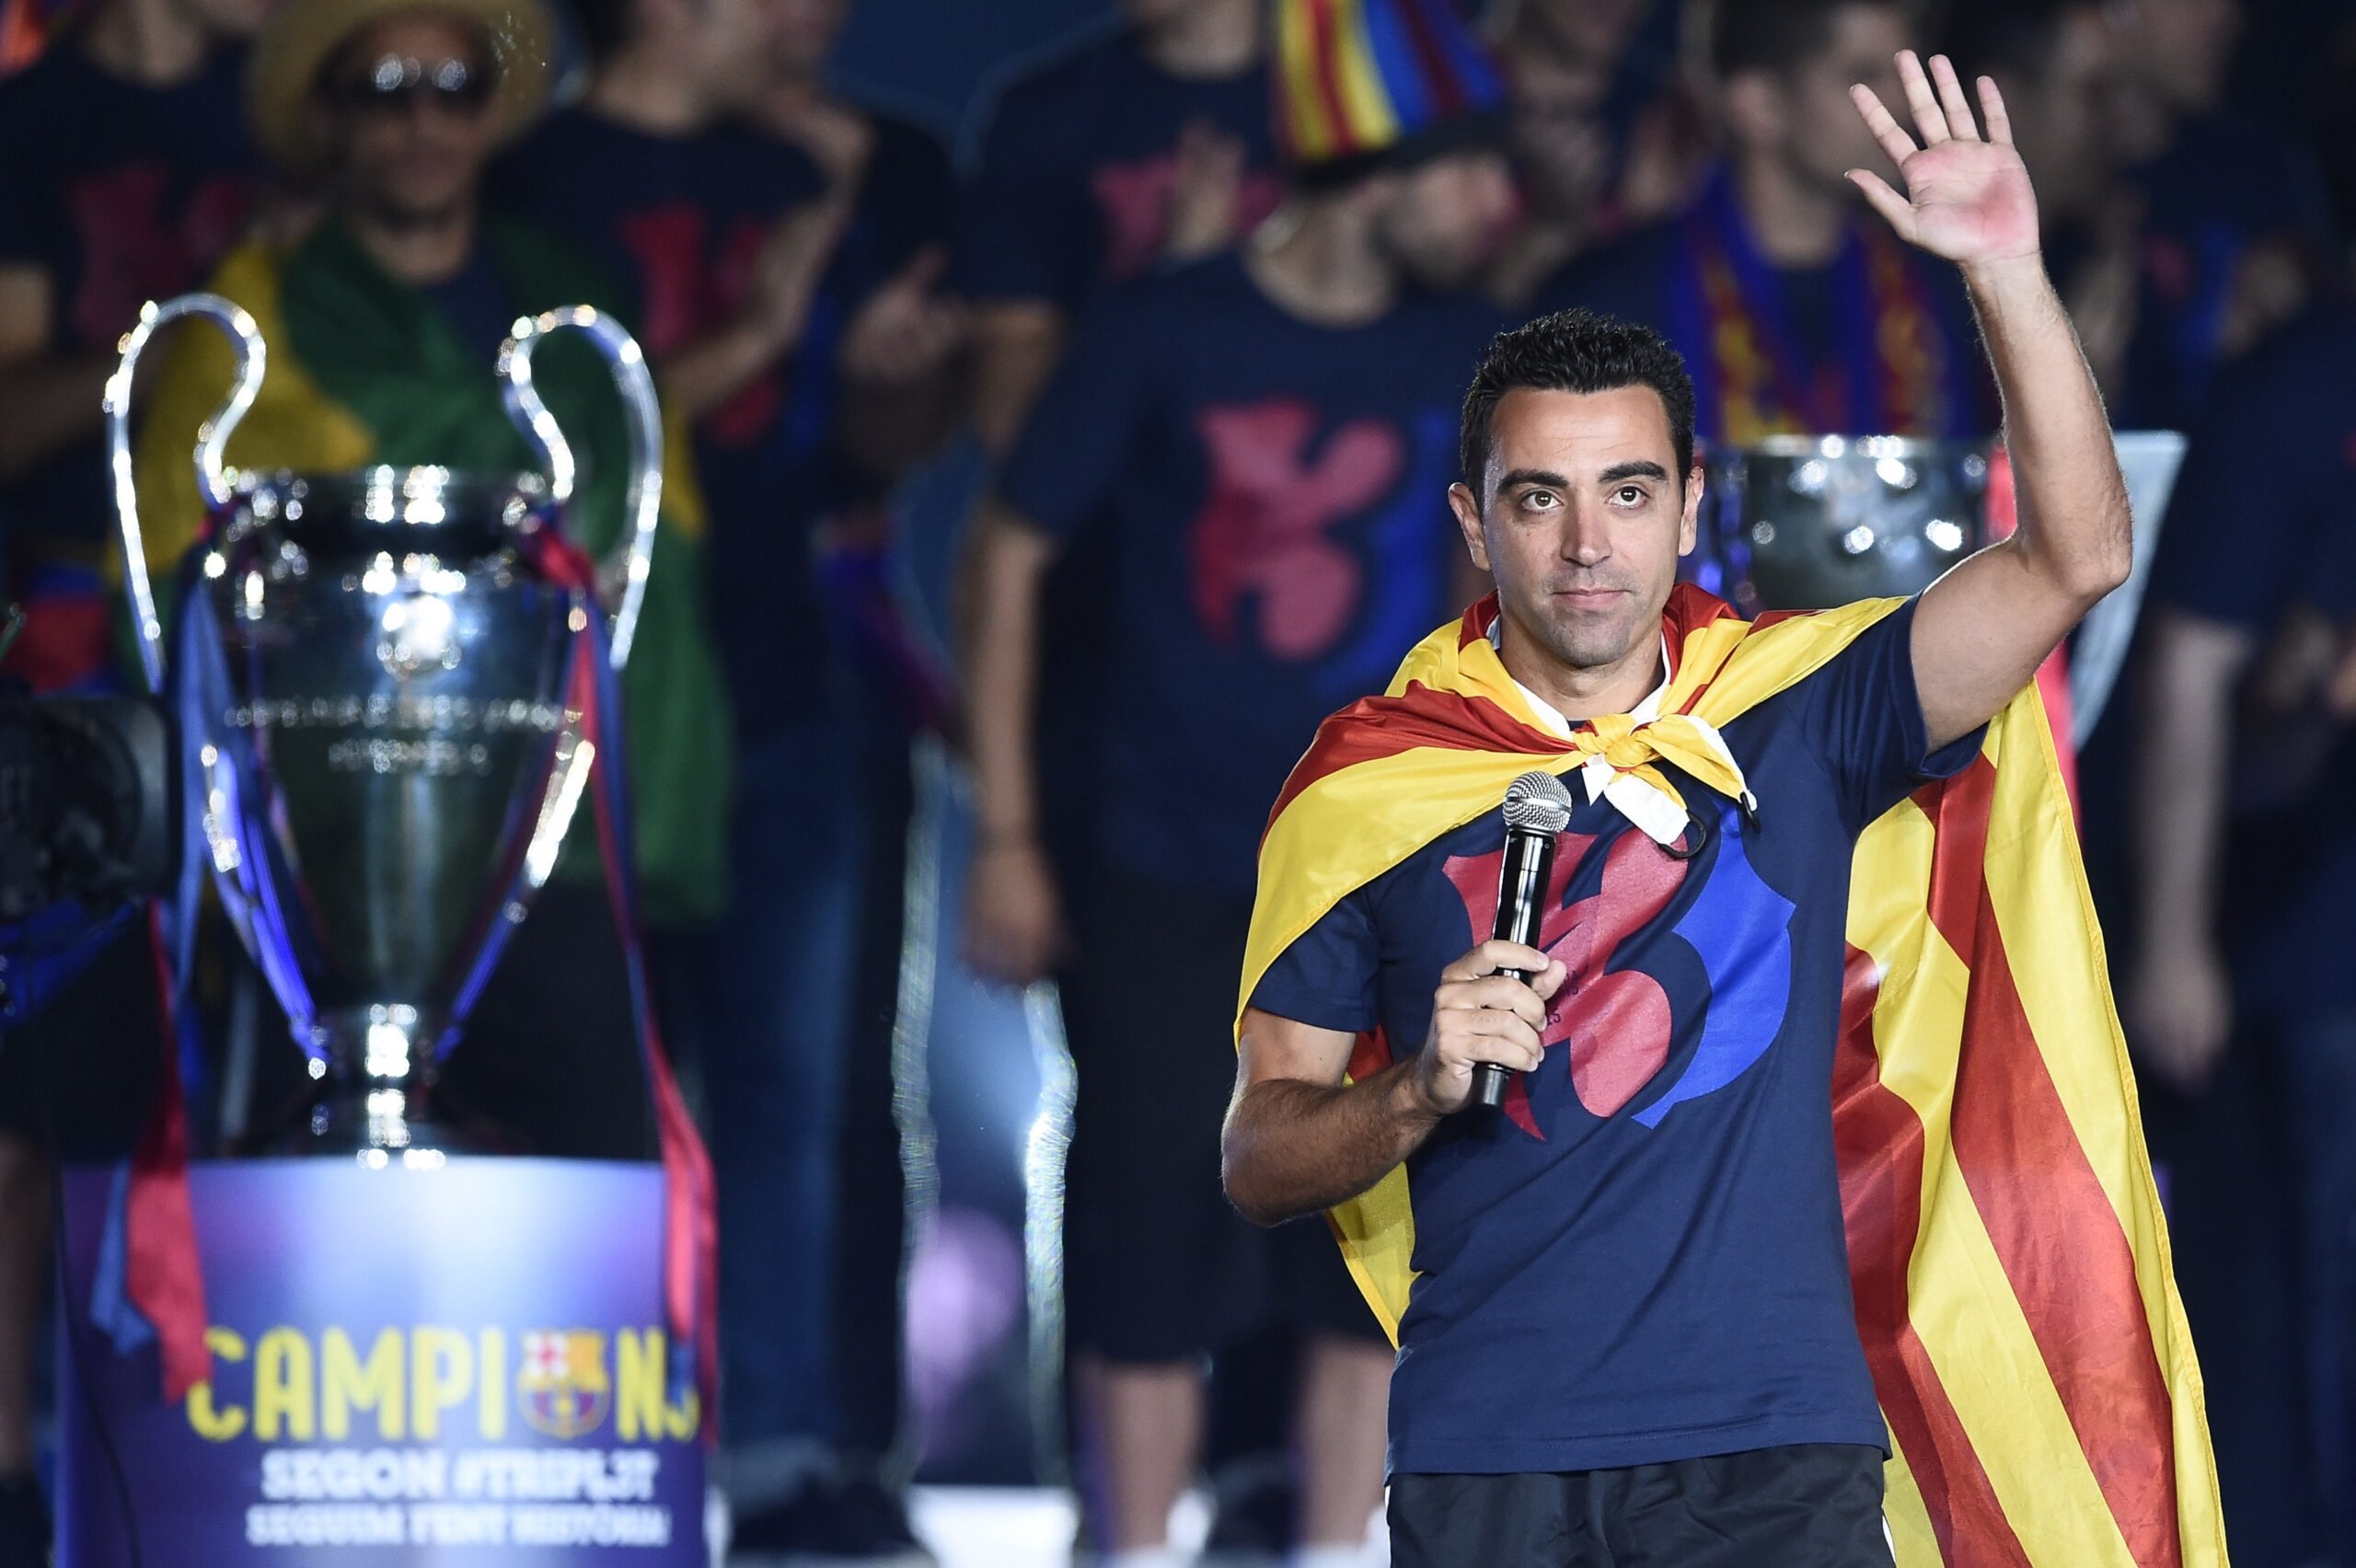 Barcelona's midfielder Xavi Hernandez waves as he takes part in the celebrations held for their victory over Juventus, one day after the UEFA Champions League final football, at the Camp Nou stadium in Barcelona on June 7, 2015. Luis Suarez and Neymar scored second-half goals to give Barcelona a 3-1 Champions League final victory over Juventus on June 6, 2015 as the Spaniards became the first team to twice win the European treble.